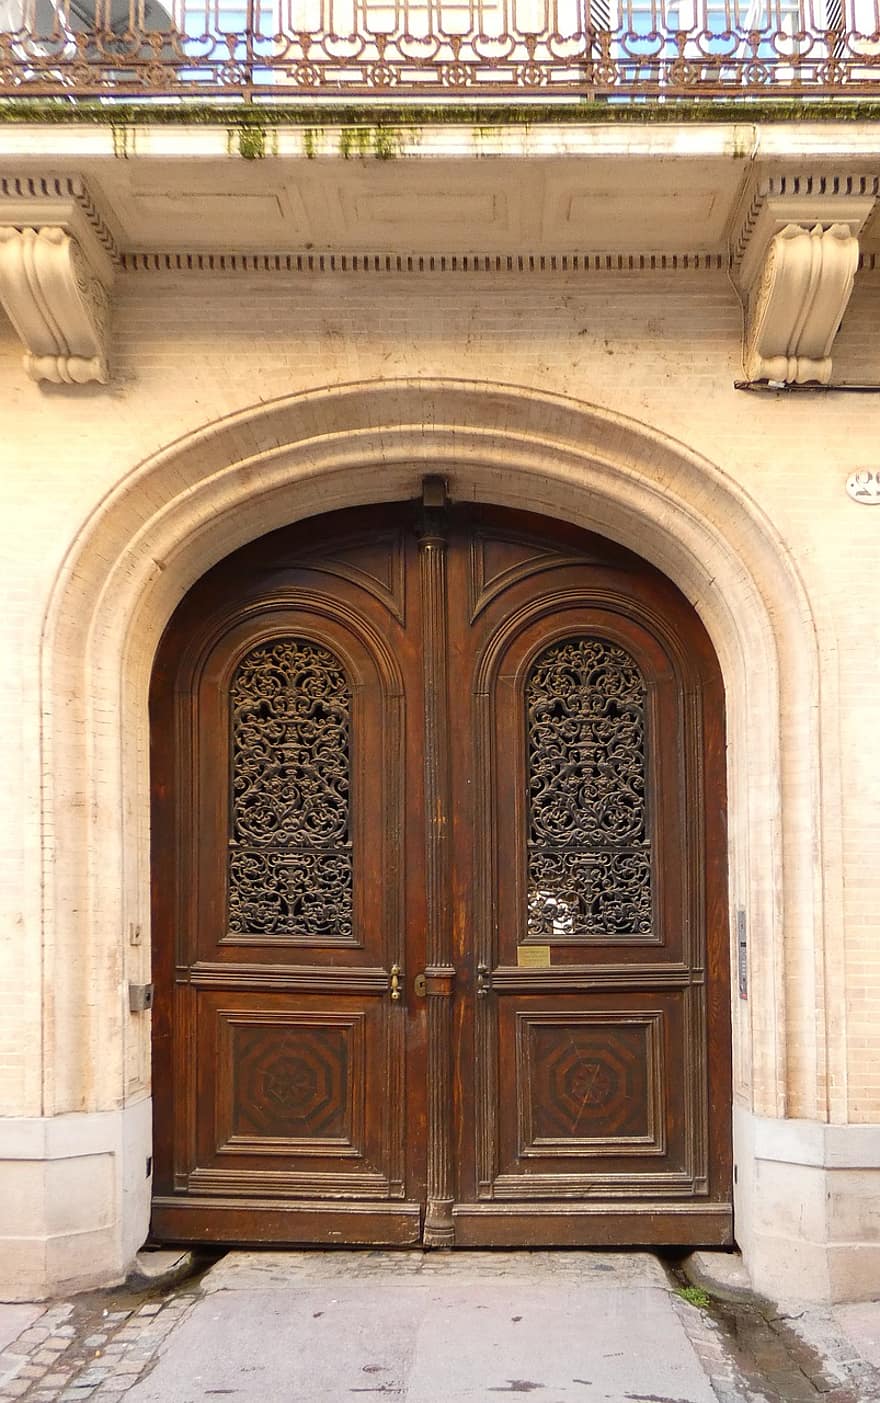 Door, Wood, Entrance, Old, Historical, Architecture, Occitania, closed, christianity, building exterior, arch